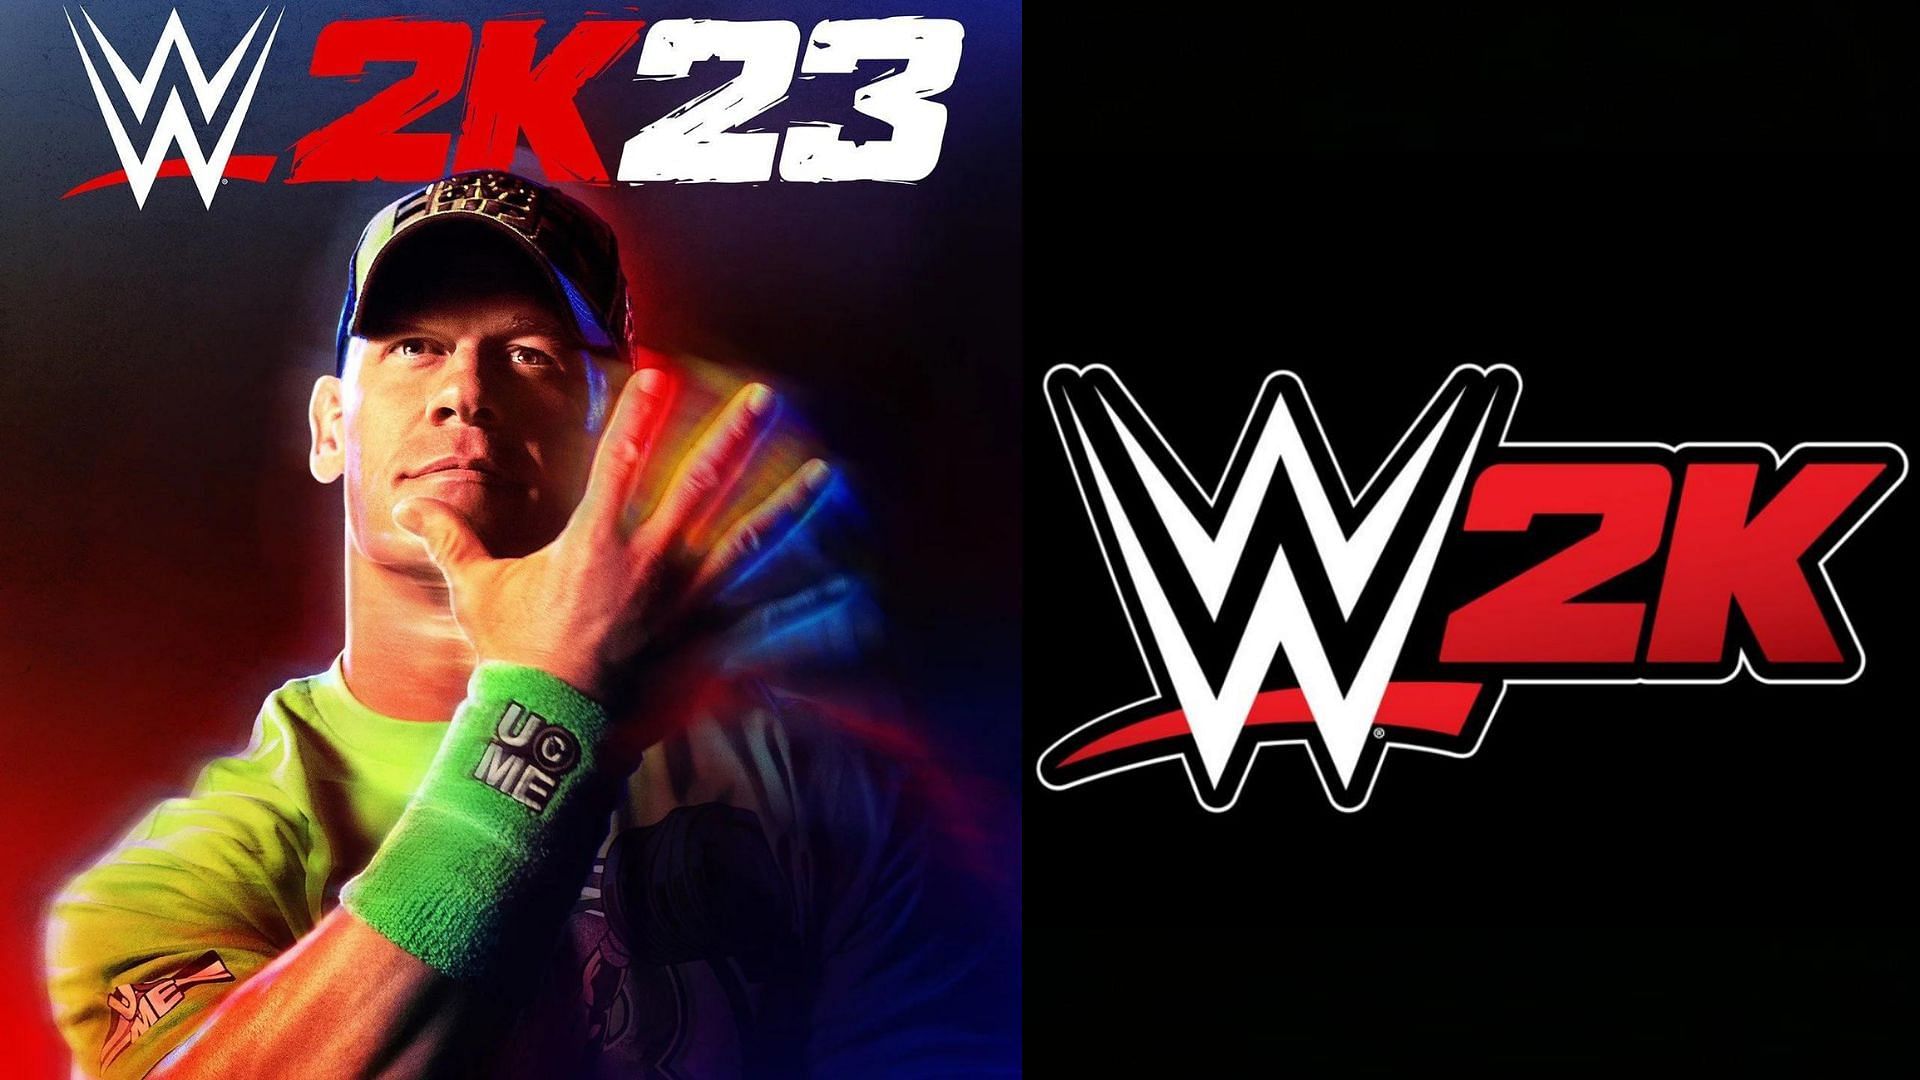 WWE 2K23: John Cena is the cover for this year